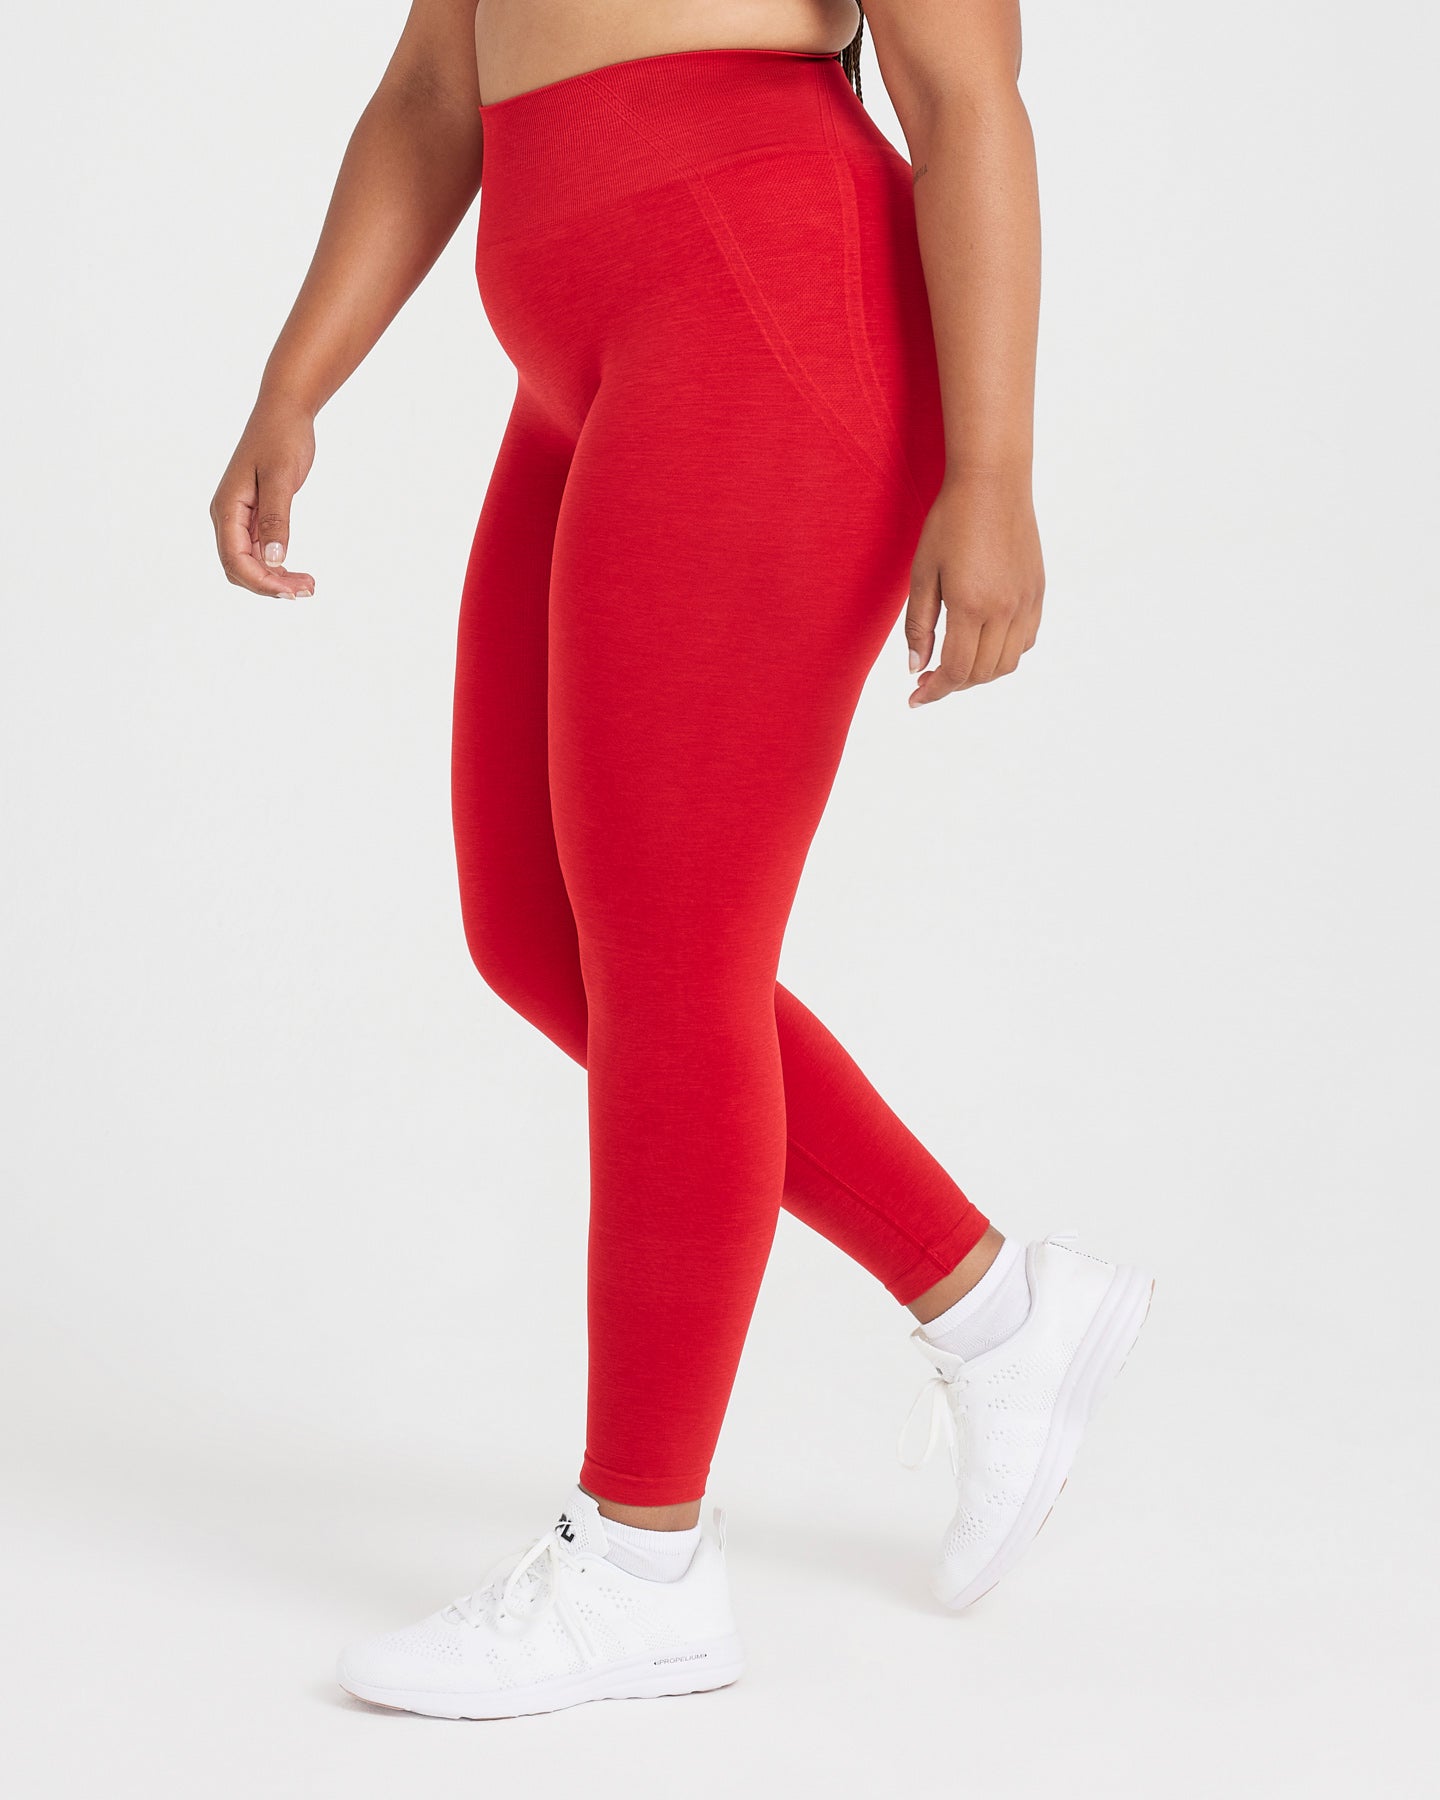 CNASA Seamless Leggings for Women Yoga Pants High Waist Tummy Control  Workout Running Cycling Fitness Leggings, Red (watermelon red) : :  Fashion